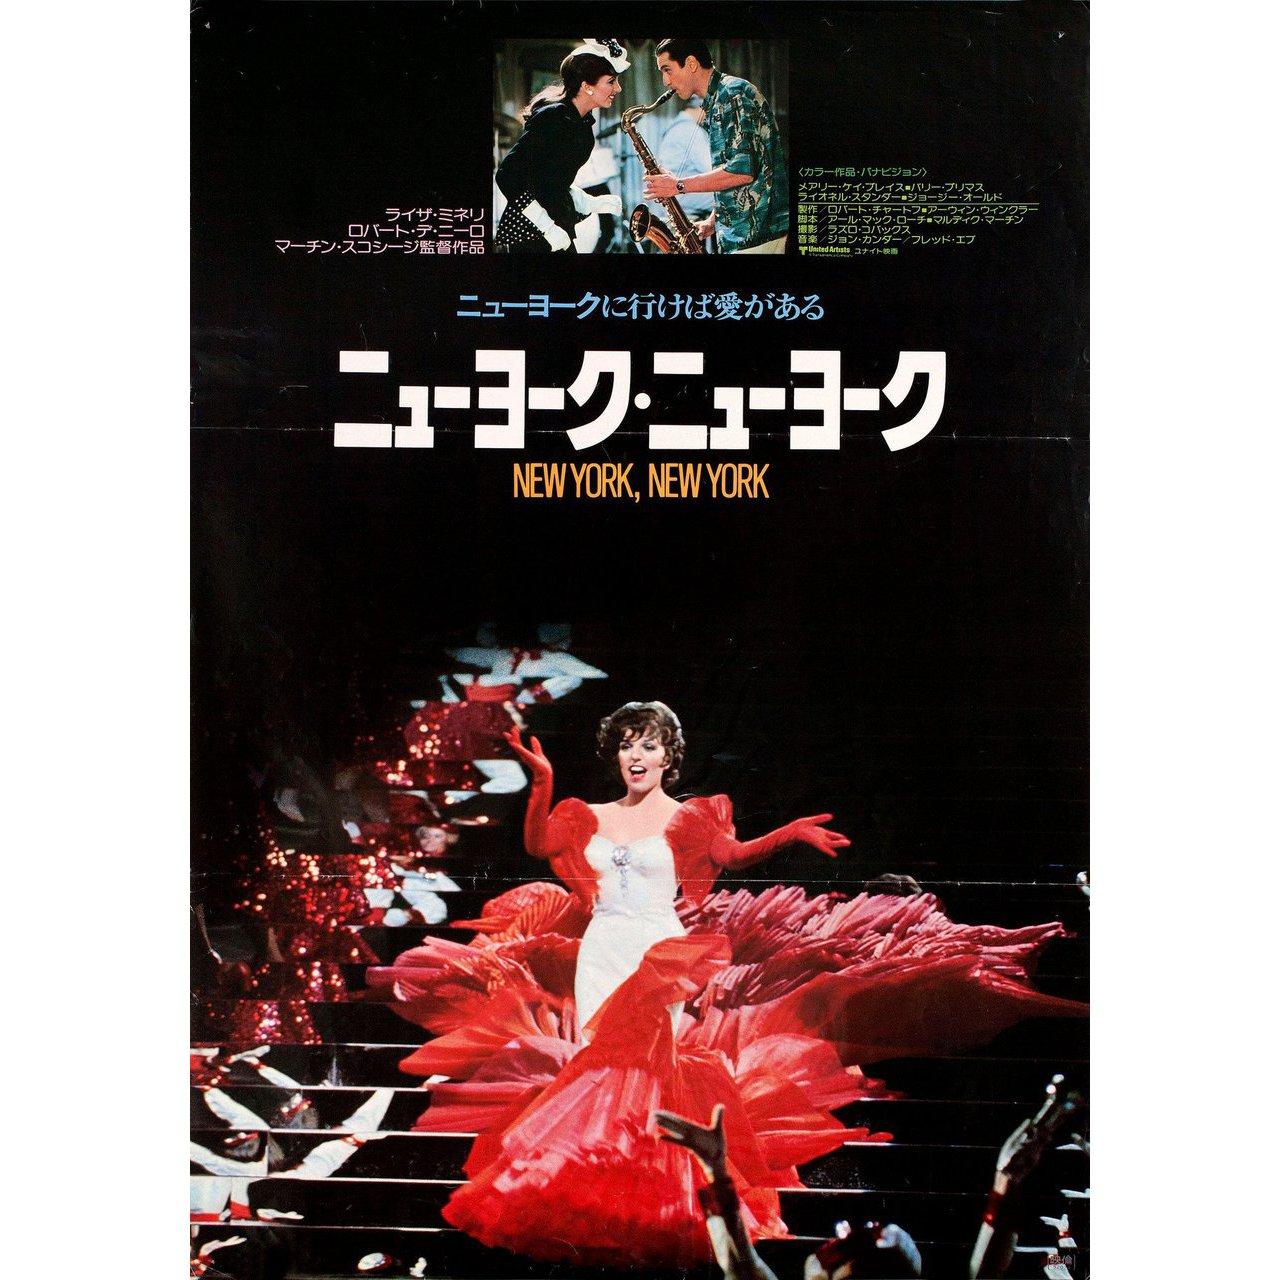 Original 1977 Japanese B2 poster for the film New York, New York directed by Martin Scorsese with Liza Minnelli / Robert De Niro / Lionel Stander / Barry Primus. Very good-fine condition, folded with pinholes in corners. Many original posters were